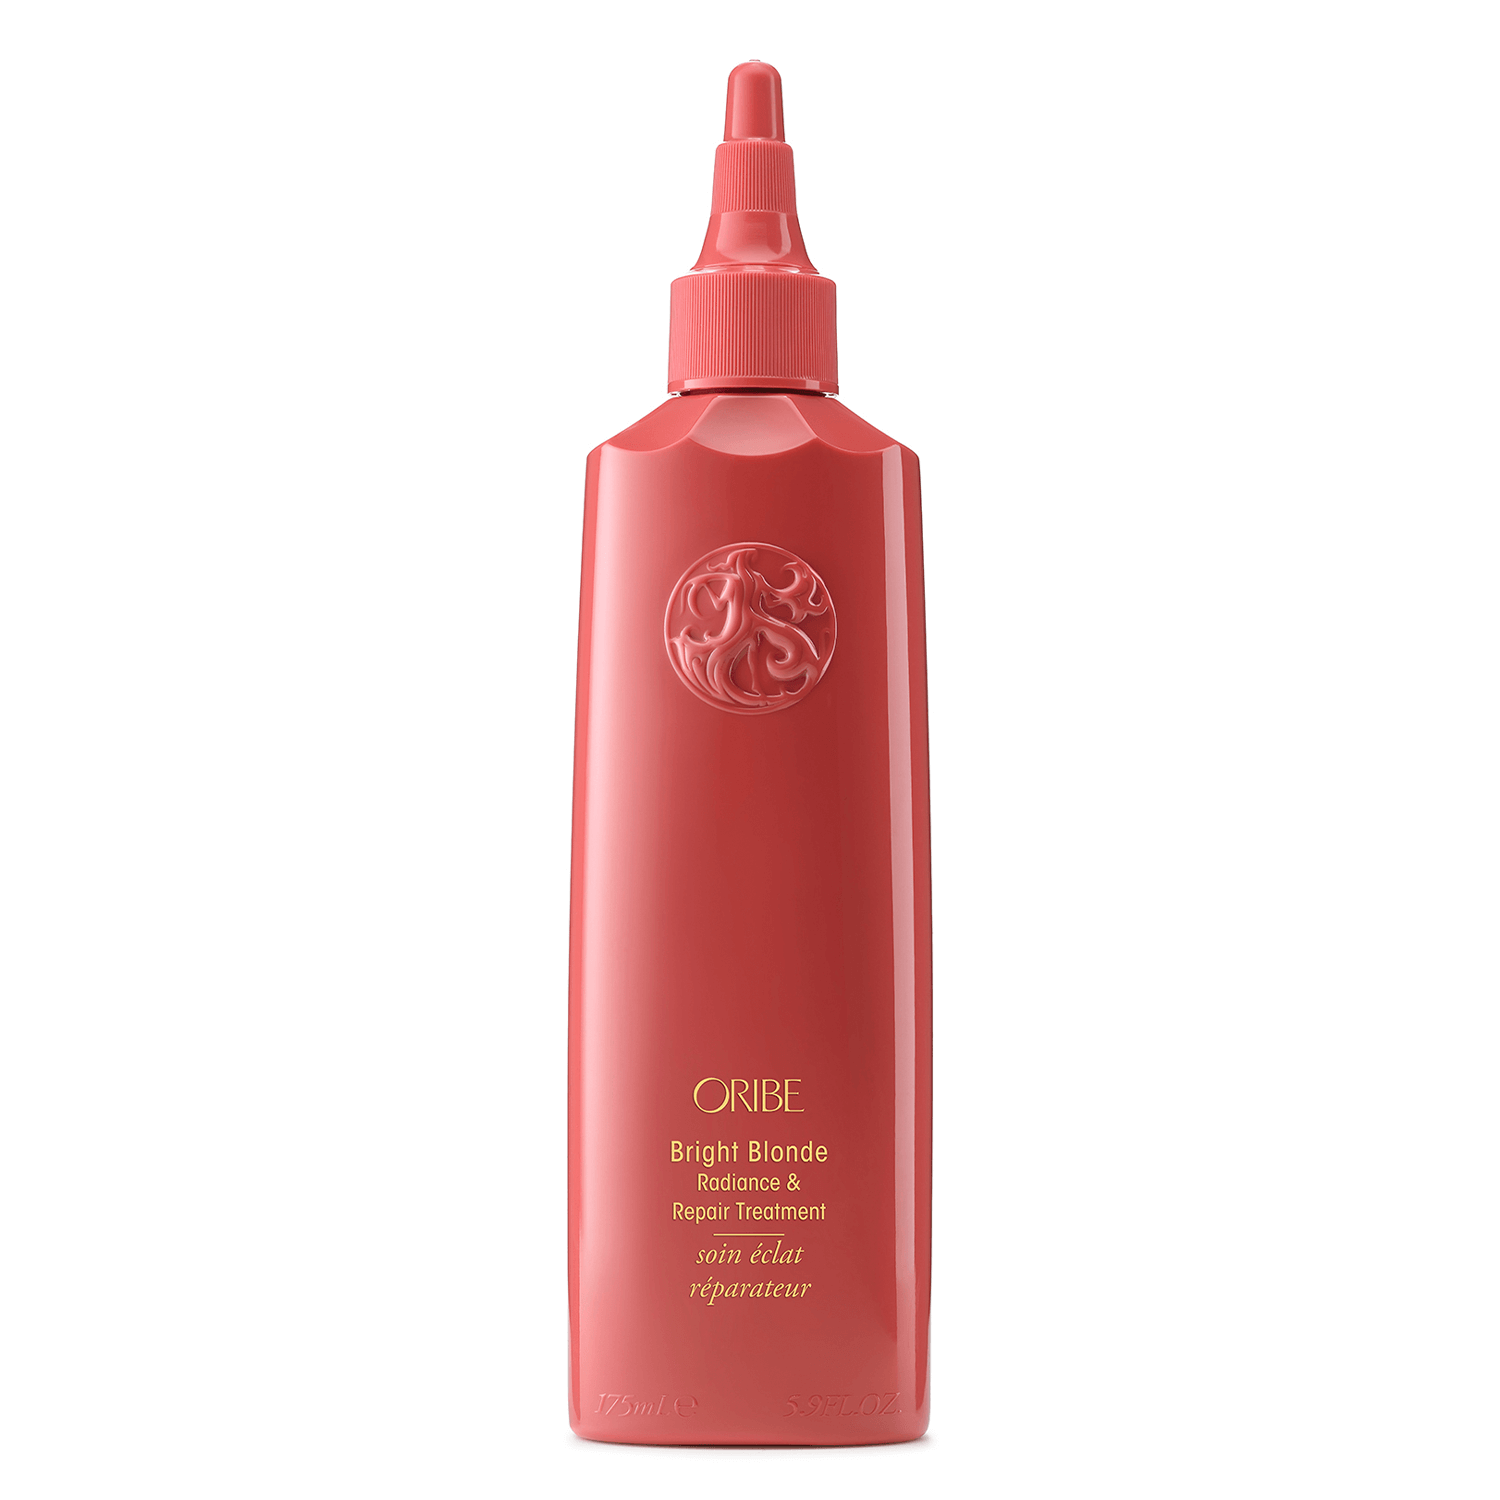 Product image from Oribe Care - Bright Blonde Radiance & Repair Treatment